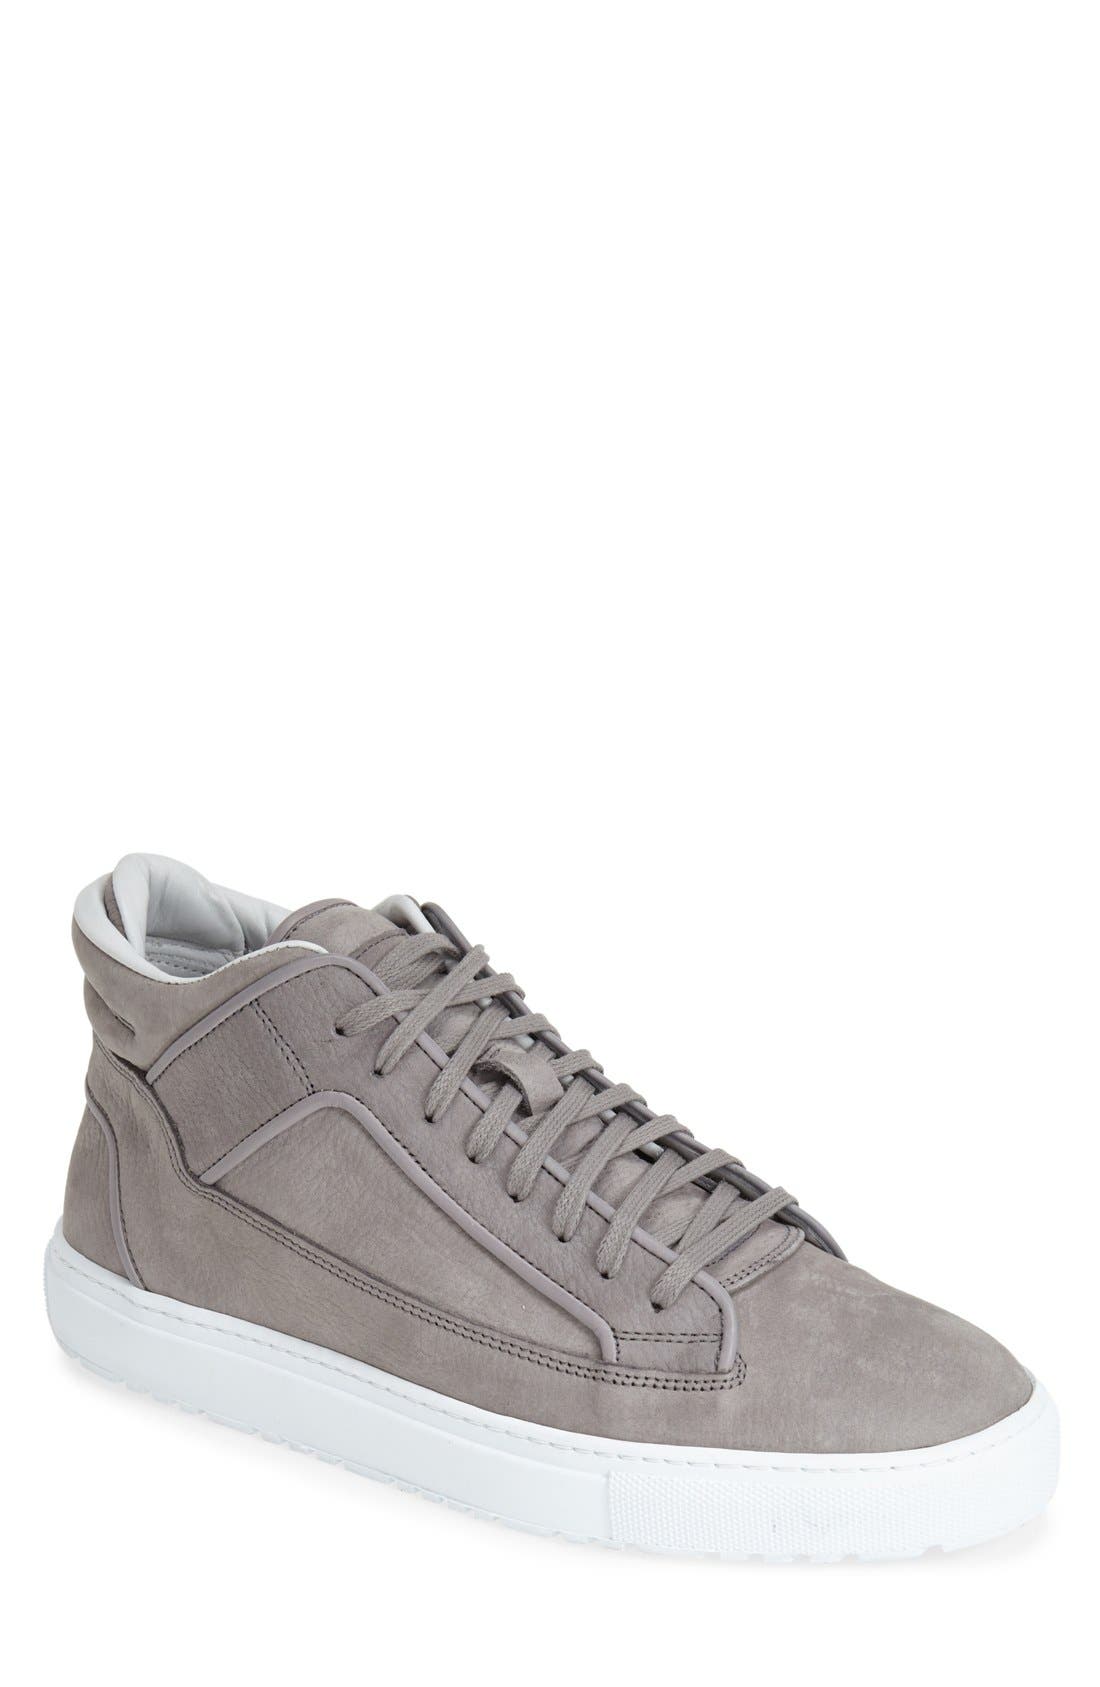 ETQ Amsterdam Leather Mid Top Sneaker 